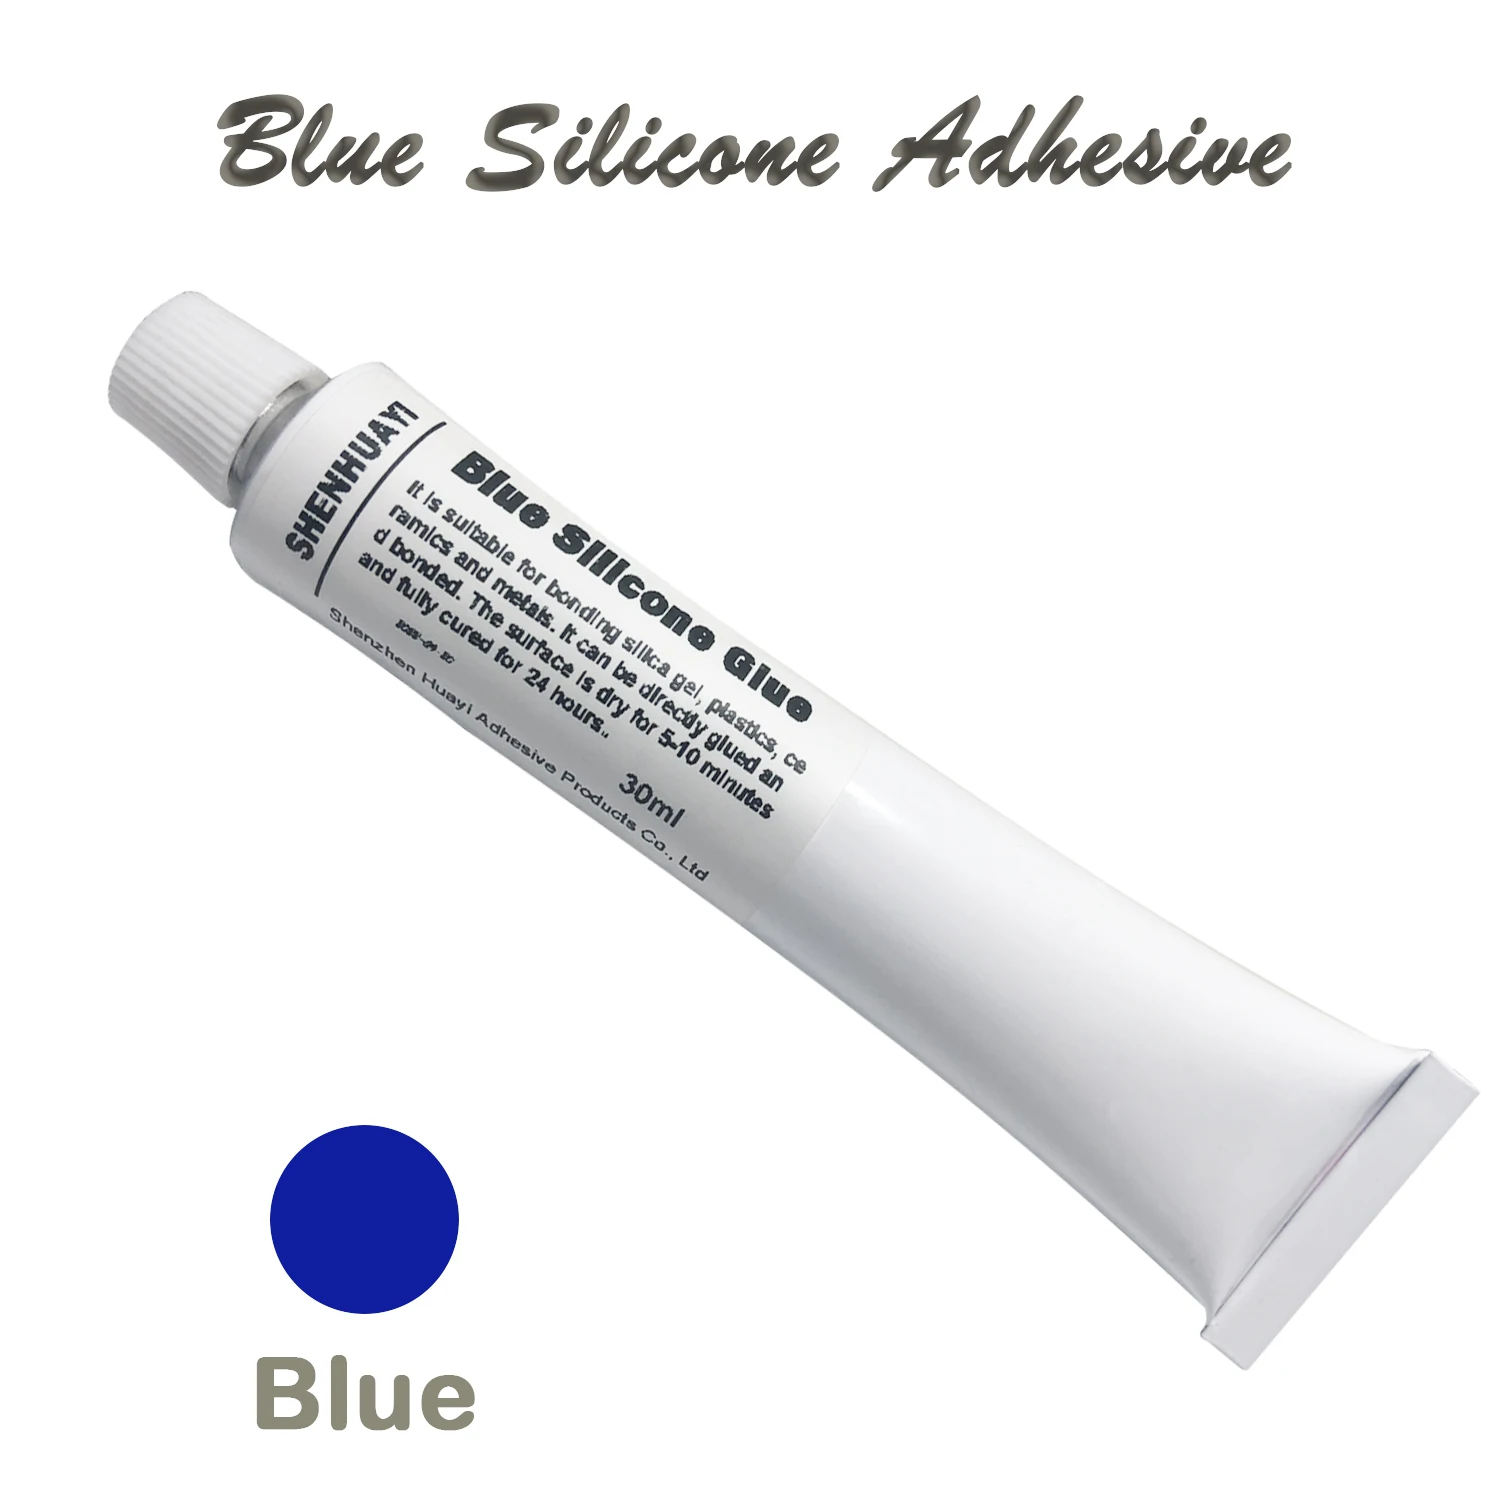 

Silicone Coloring Adhesive Blue Silicone Adhesive